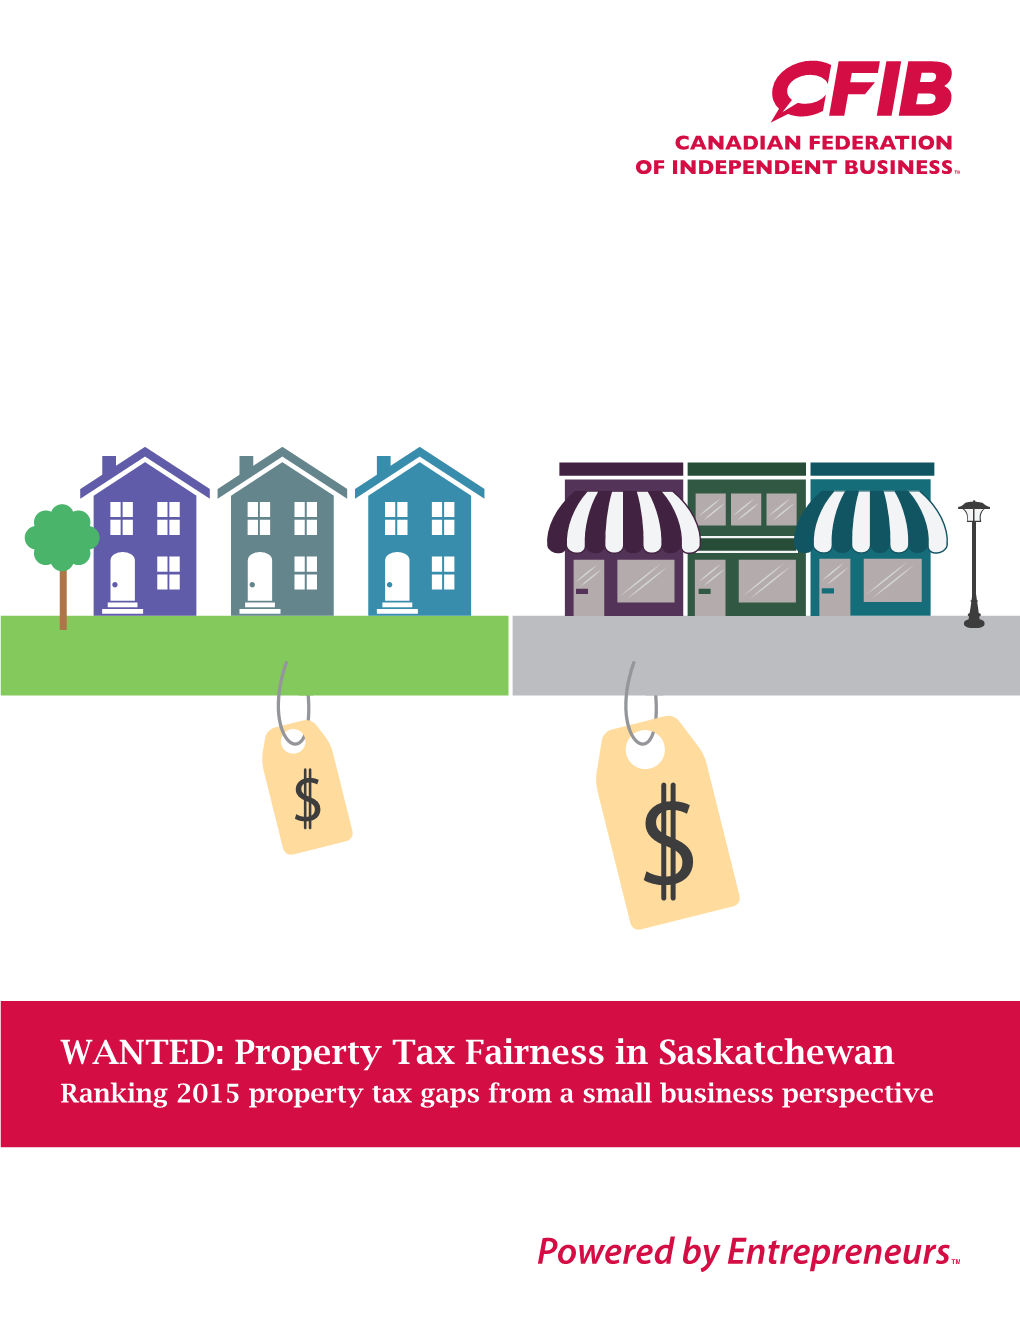 WANTED: Property Tax Fairness in Saskatchewan Ranking 2015 Property Tax Gaps from a Small Business Perspective